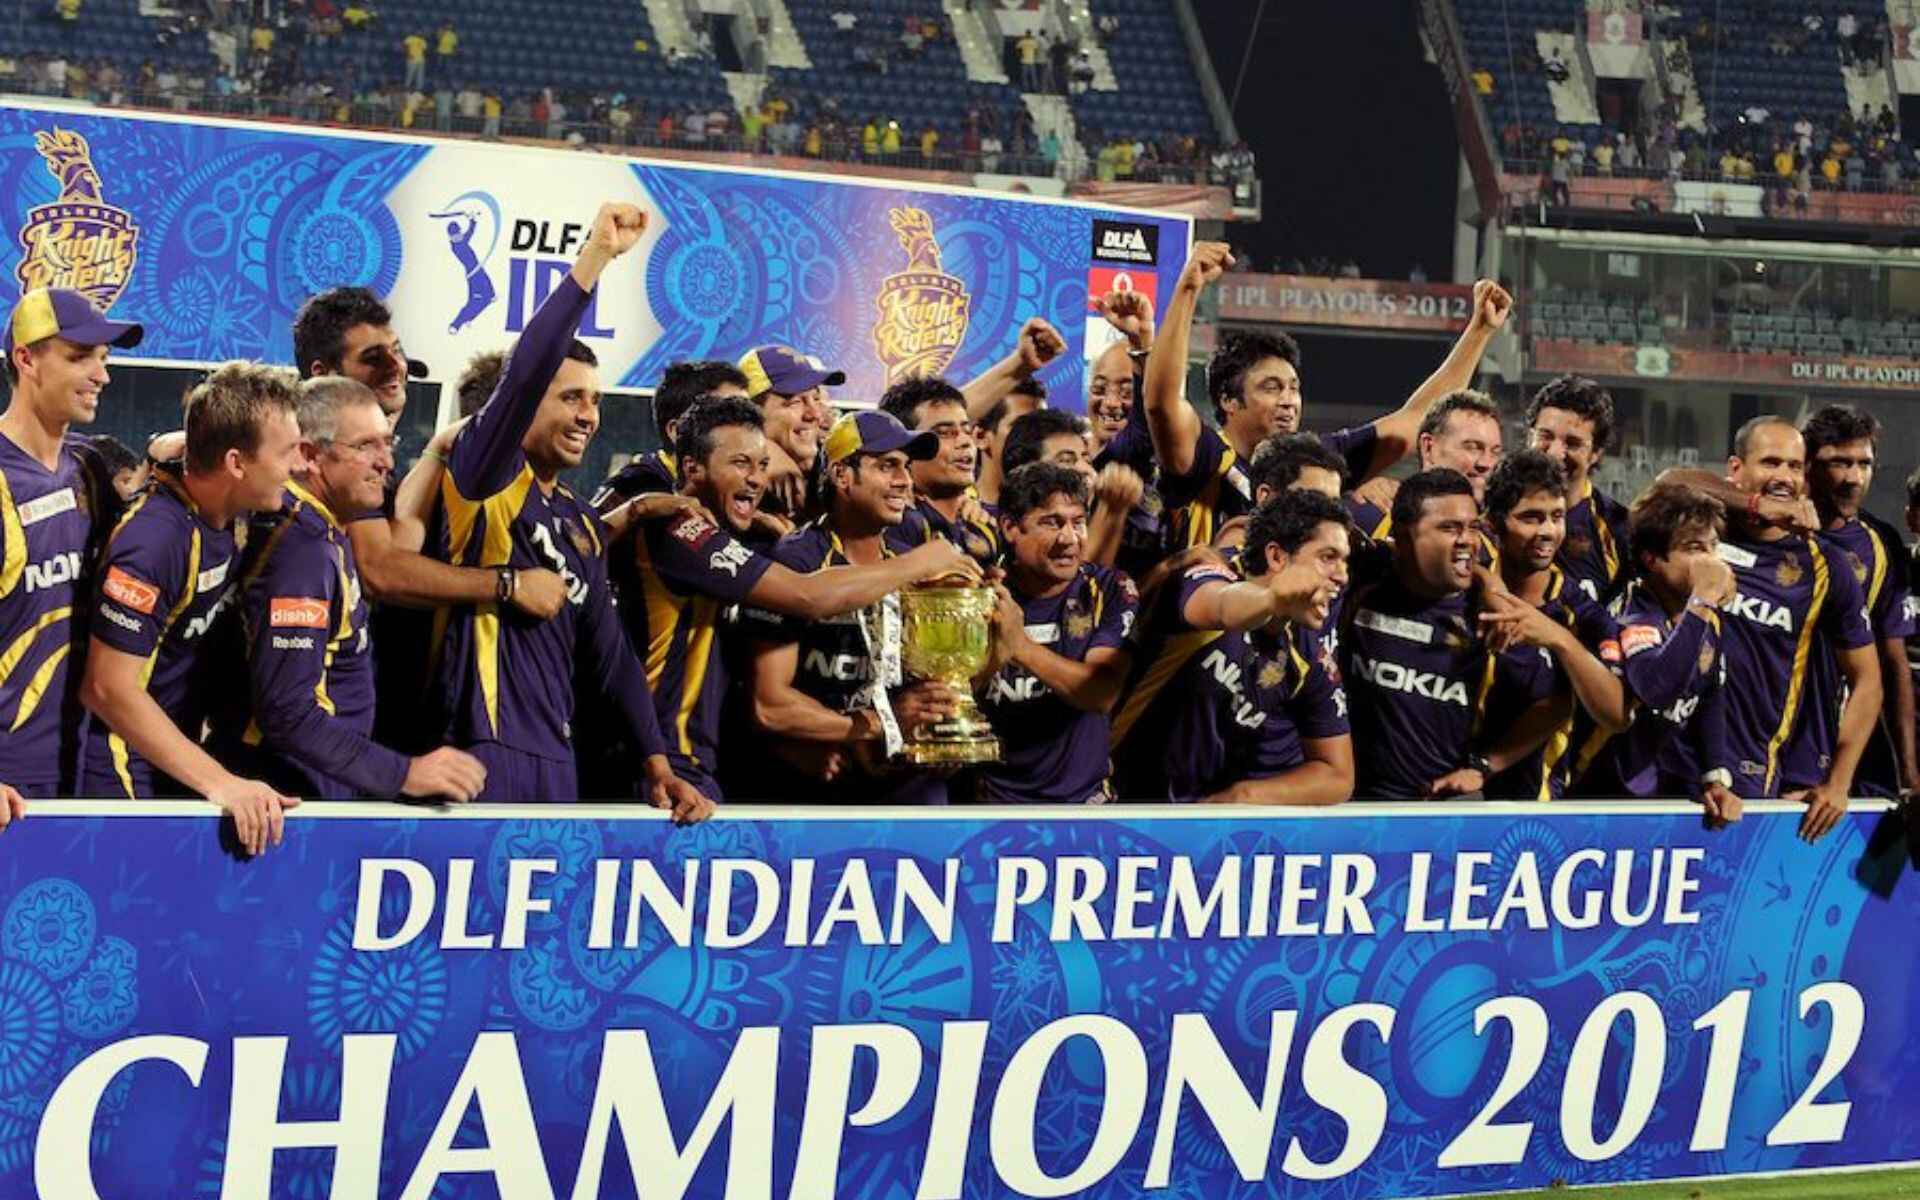 KKR defeated CSK to win their first IPL trophy (x.com)